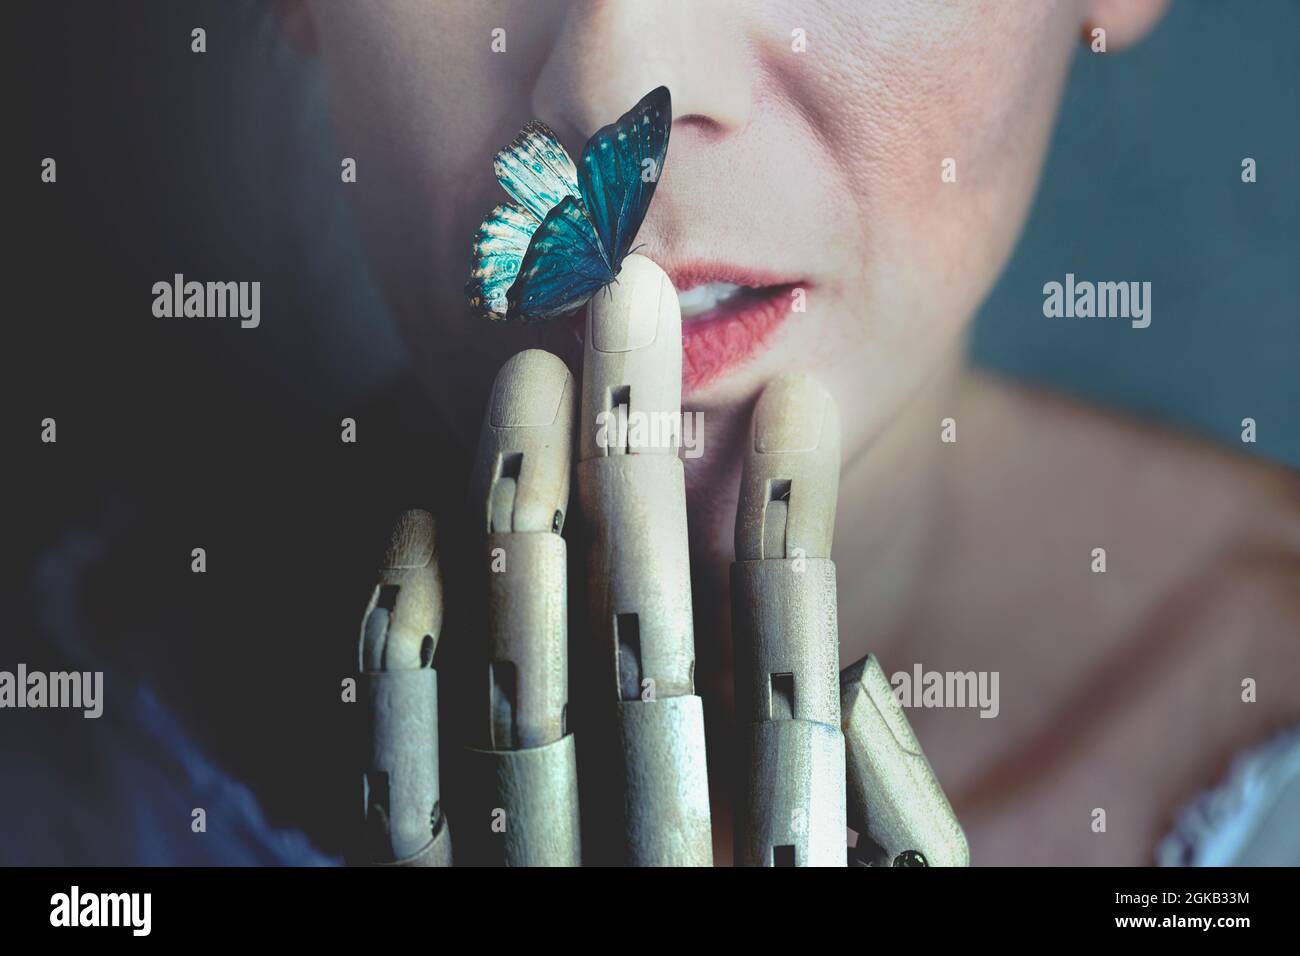 surreal butterfly leaning of a wooden hand touching a woman's mouth Stock Photo